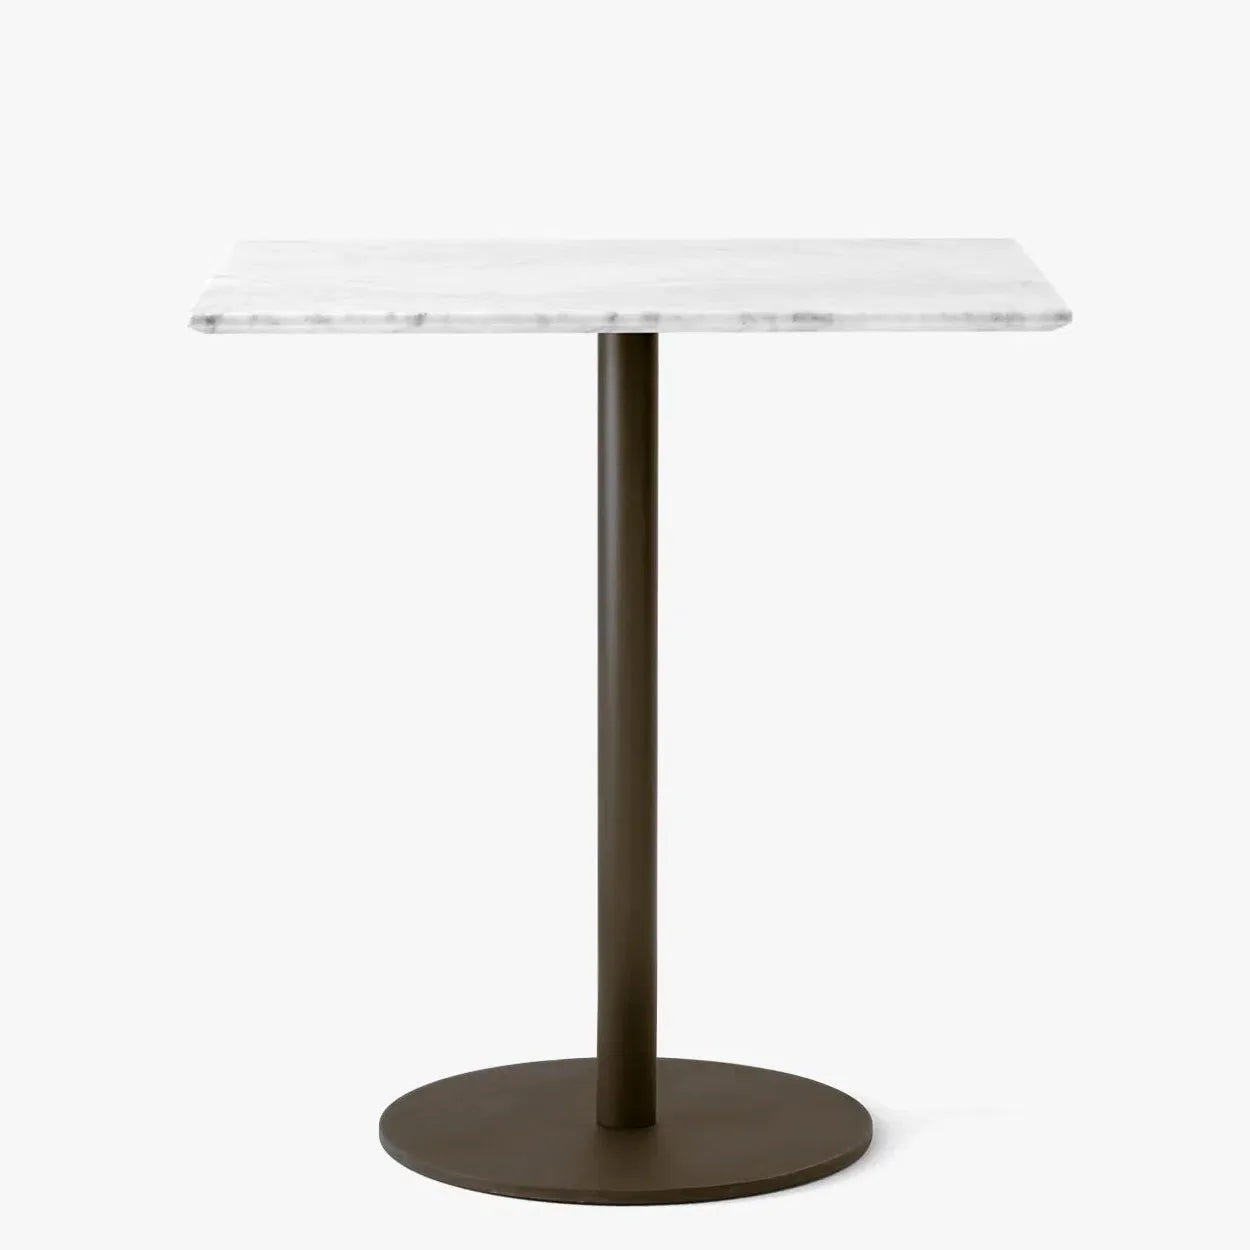 In Between Table SK16 Bianco Carrara Bronzed Center Base